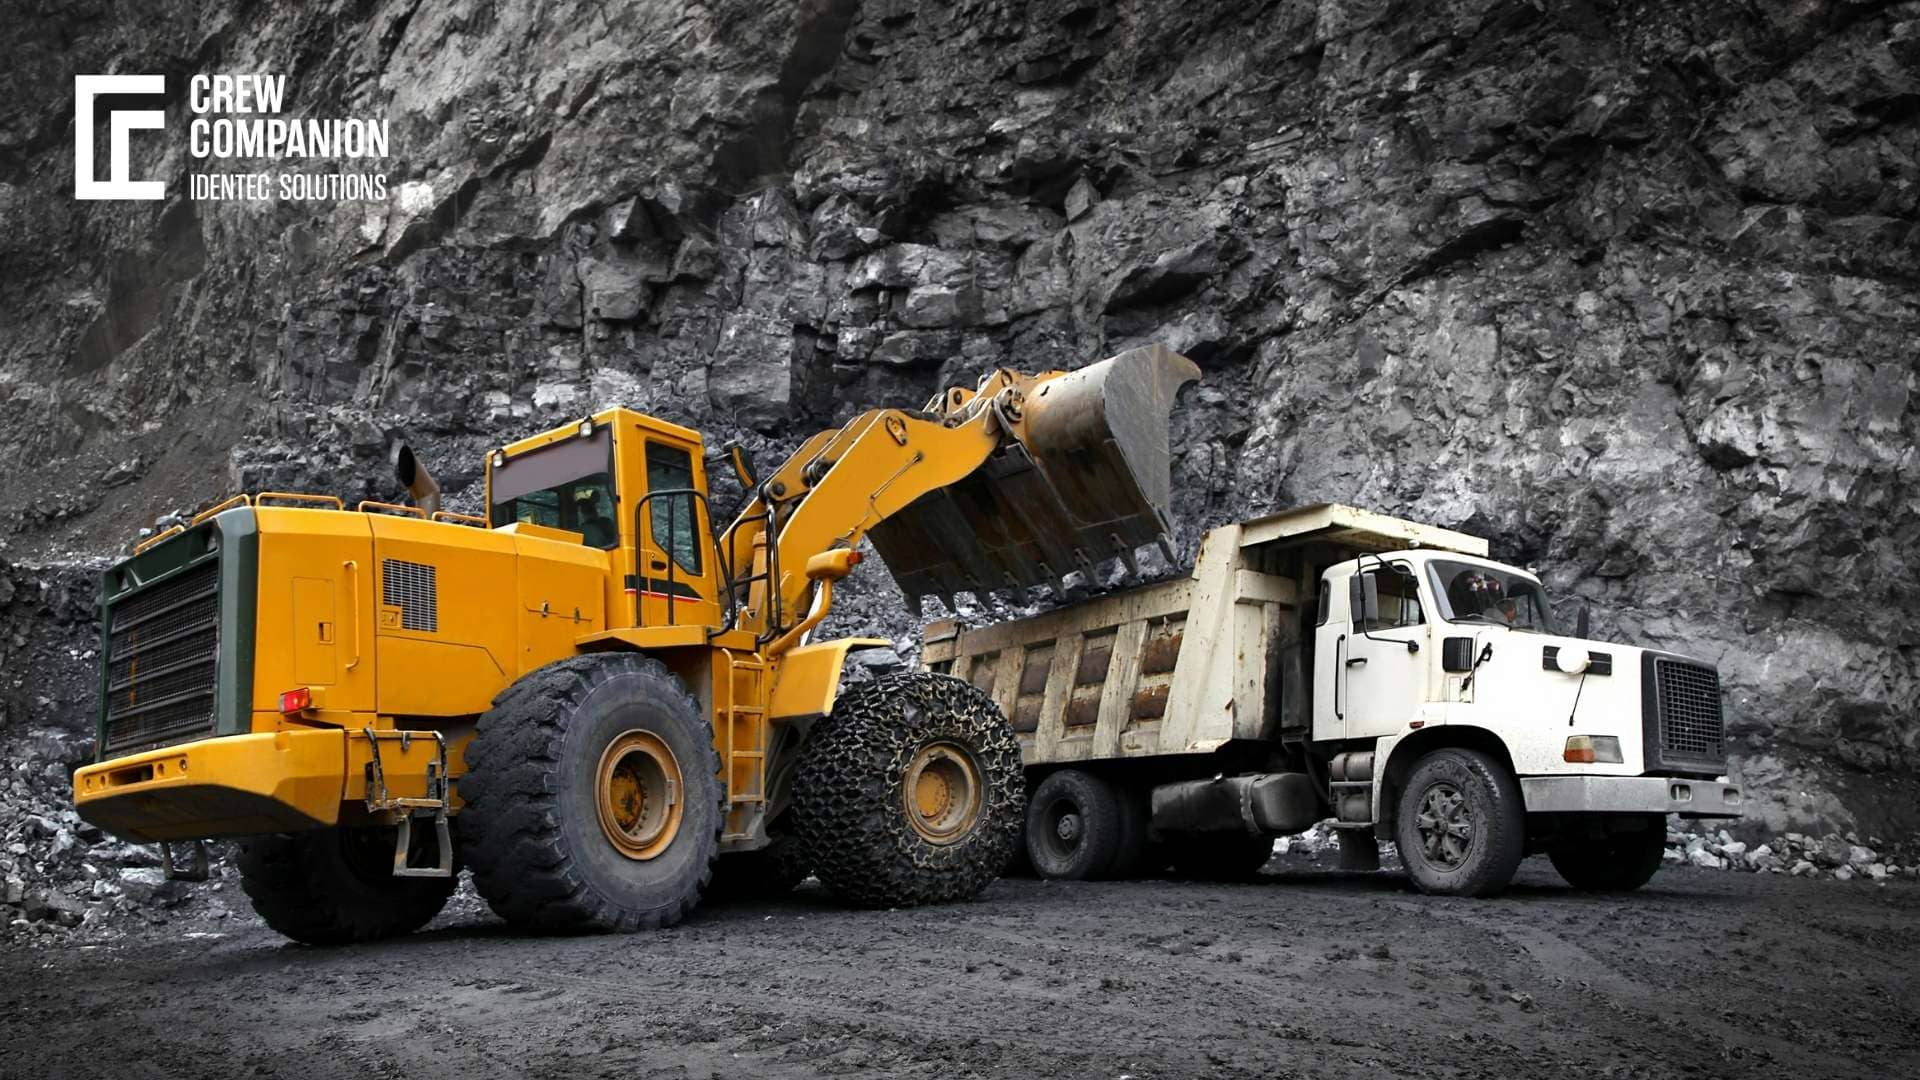 RFID in mining: The many use cases of a proven technology